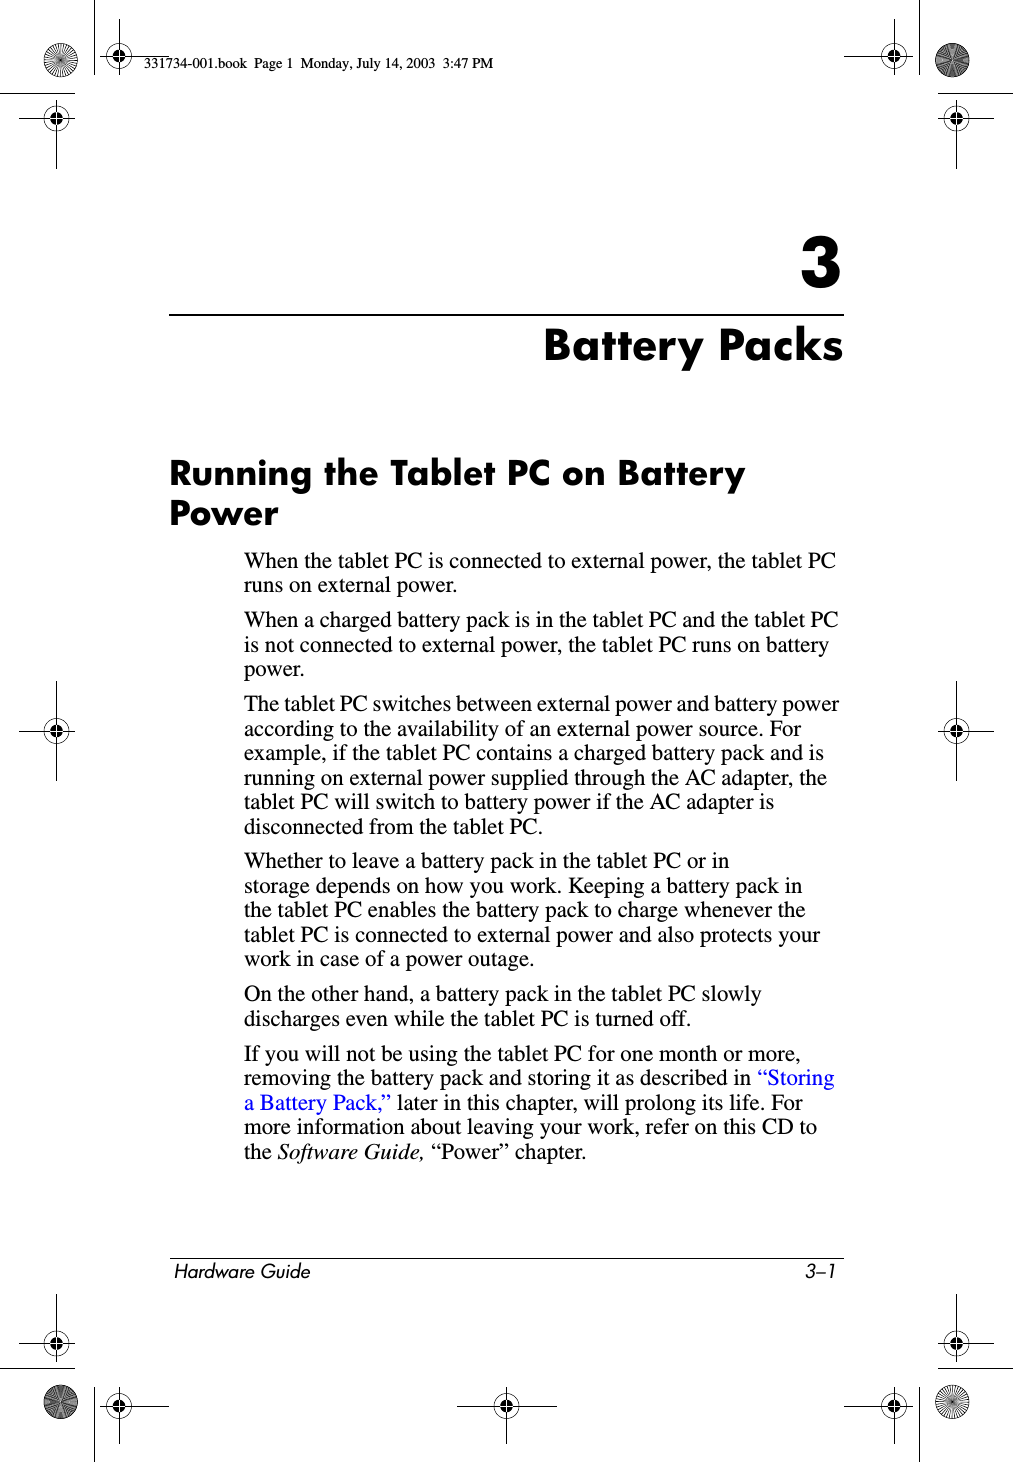 Hardware Guide 3–13Battery PacksRunning the Tablet PC on Battery PowerWhen the tablet PC is connected to external power, the tablet PC runs on external power.When a charged battery pack is in the tablet PC and the tablet PC is not connected to external power, the tablet PC runs on battery power.The tablet PC switches between external power and battery power according to the availability of an external power source. For example, if the tablet PC contains a charged battery pack and is running on external power supplied through the AC adapter, the tablet PC will switch to battery power if the AC adapter is disconnected from the tablet PC.Whether to leave a battery pack in the tablet PC or in storage depends on how you work. Keeping a battery pack in the tablet PC enables the battery pack to charge whenever the tablet PC is connected to external power and also protects your work in case of a power outage.On the other hand, a battery pack in the tablet PC slowly discharges even while the tablet PC is turned off.If you will not be using the tablet PC for one month or more, removing the battery pack and storing it as described in “Storing a Battery Pack,” later in this chapter, will prolong its life. For more information about leaving your work, refer on this CD to the Software Guide, “Power” chapter.331734-001.book  Page 1  Monday, July 14, 2003  3:47 PM